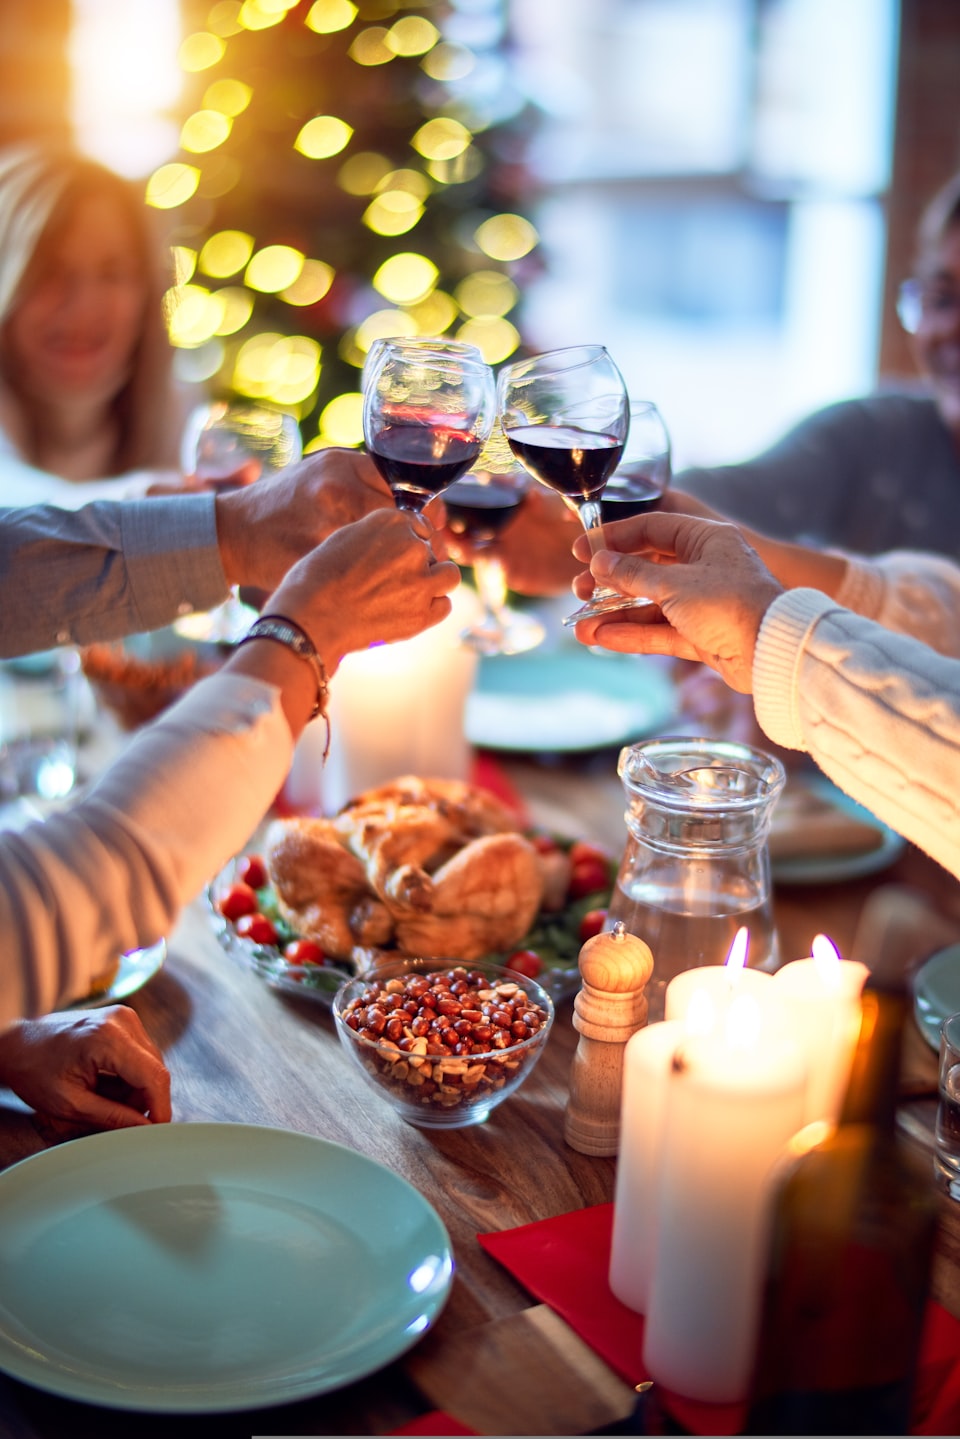 Practical Ayurvedic Tips for Holiday Eating